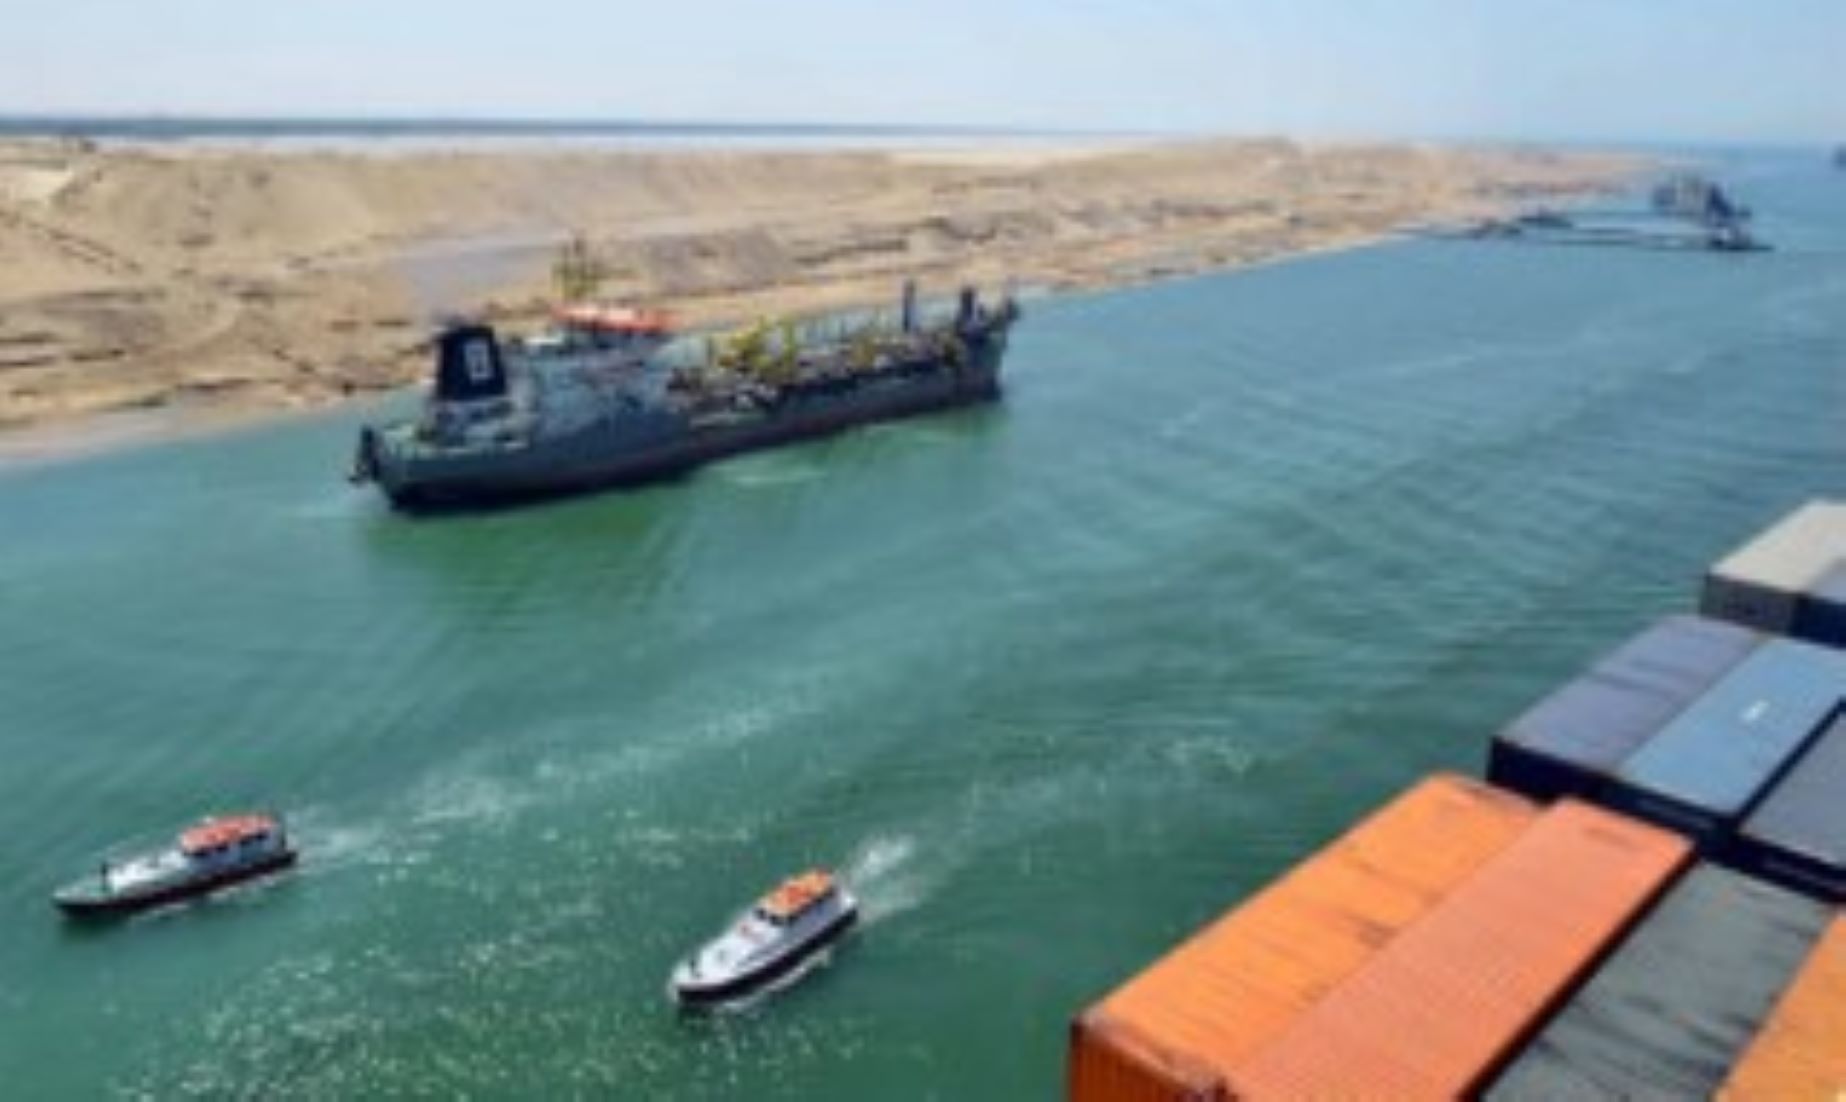 Egyptian Authority Refloated Stranded Ship In Suez Canal